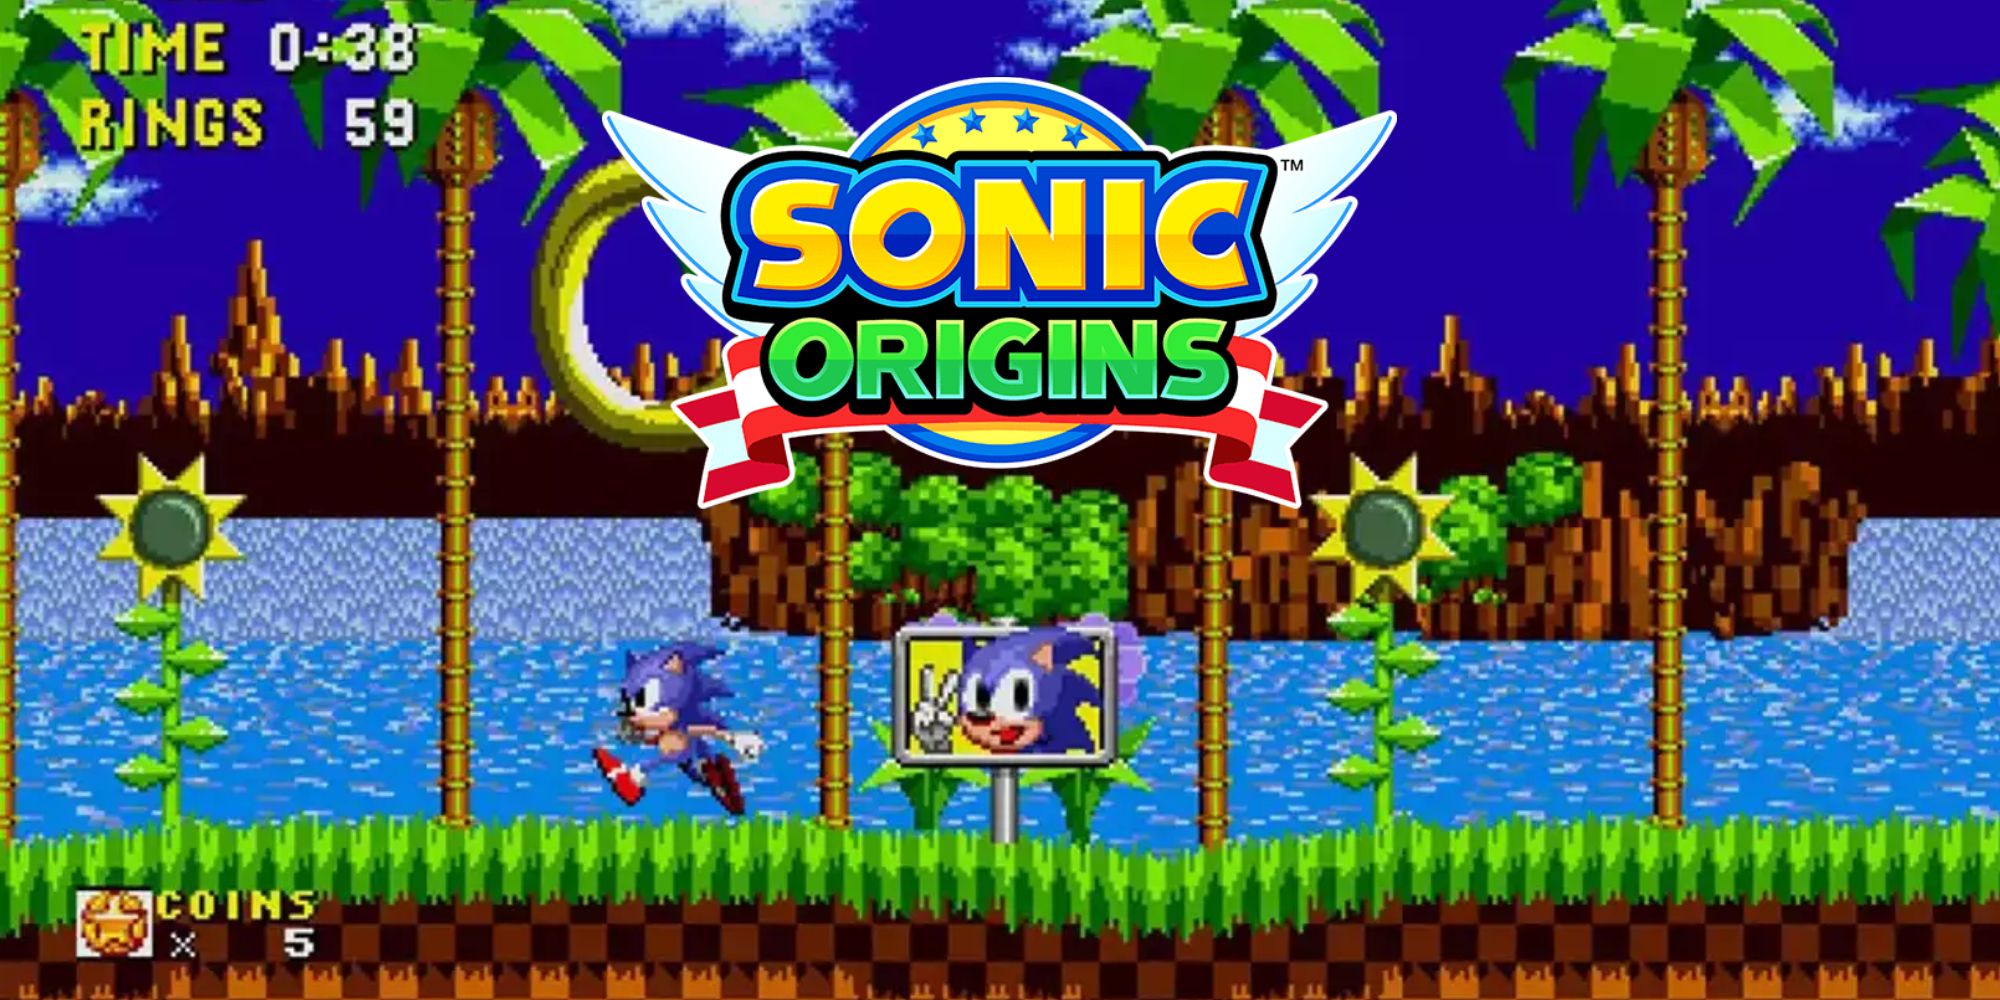 Take A Look At The New Modes And Content Coming To Sonic Origins